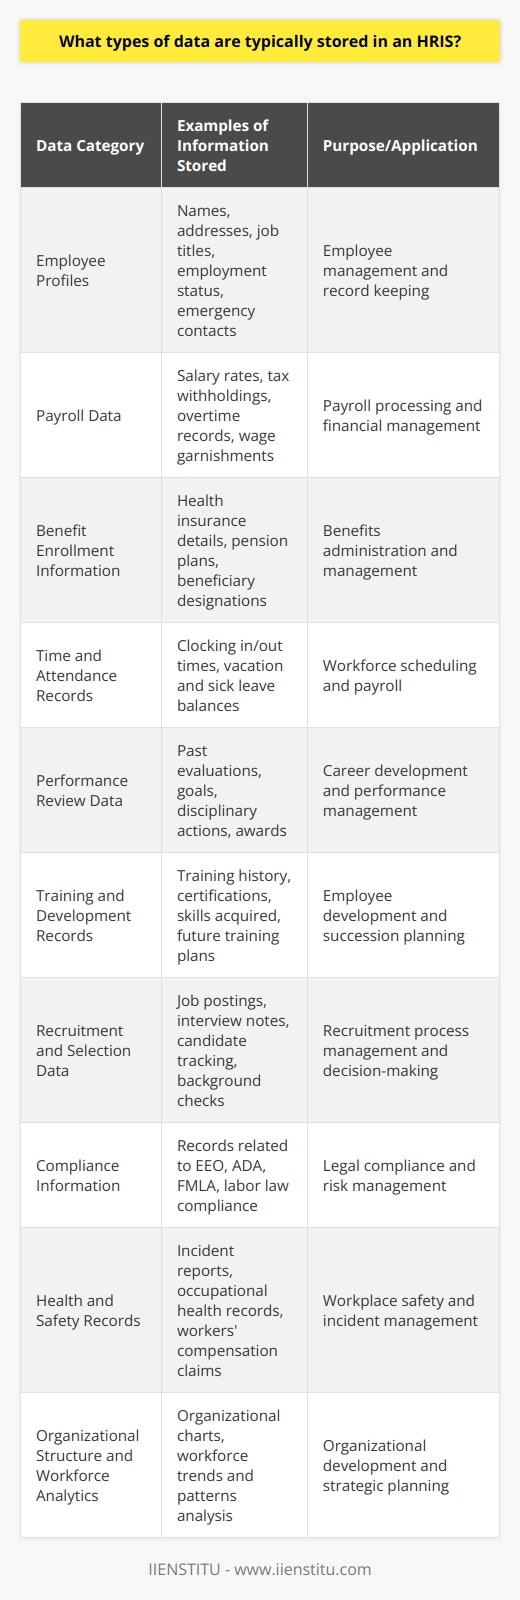 A Human Resource Information System (HRIS) serves as the backbone for a company's human resources department, enabling better data management and streamlined HR processes. While a multitude of data types are gathered within an HRIS, each serves a unique purpose in employee management and organizational development. Here's a look into the common data categories managed within such systems:1. **Employee Profiles:** These contain comprehensive personal and professional information about each employee. Personal details like names, addresses, social security numbers, emergency contacts, and demographic information are typical. Professional details include job titles, departmental information, manager details, and employment status (full-time, part-time, contractor, etc.).   2. **Payroll Data:** An HRIS often integrates payroll functionality, which necessitates storing data such as salary rates, tax withholdings, direct deposit information, and other wage-related details. Payroll data also encompasses records of past paychecks, any wage garnishments, and overtime payment records.3. **Benefit Enrollment Information:** This covers all the data related to health insurance, pension plans, stock options, and other employee benefits. Employees' choices regarding different benefit plans, coverage details, and beneficiary designations are examples of what's stored here.4. **Time and Attendance Records:** Tracking when employees come to work, when they leave, and how much sick or vacation leave they've taken is crucial for workforce management. This data is vital for both payroll and performance evaluation purposes.5. **Performance Review Data:** Performance reviews are pivotal for career development and compensation decisions. An HRIS may store past and present performance evaluations, goals, performance improvement plans, and any awards or disciplinary actions taken.6. **Training and Development Records:** To monitor and manage employees' professional growth, the HRIS will keep records of completed trainings, certifications obtained, skills acquired, and future training needs or plans.7. **Recruitment and Selection Data:** This includes information related to job postings, candidate tracking, interview notes, background check details, and applicant communications. It enables HR staff to manage the recruitment process effectively.8. **Compliance Information:** To ensure legal compliance, the HRIS may house data related to labor laws, EEO (Equal Employment Opportunity), ADA (Americans with Disabilities Act), FMLA (Family and Medical Leave Act), and other employment regulations.9. **Health and Safety Records:** Occupational health and safety records, incident reports, and workers' compensation claims are also stored. This information aids in maintaining workplace safety and handling any work-related injuries or illnesses.10. **Organizational Structure and Workforce Analytics:** An HRIS can map out the organizational chart, detailing hierarchies and reporting structures. It also contains workforce analytics data that helps organizations plan and make informed decisions, leveraging trends and patterns within the existing workforce.The sophistication of HRIS solutions can vary widely, from basic databases to comprehensive, cloud-based platforms offering robust analytics and artificial intelligence capabilities. IIENSTITU, as an entity engaged in powering education, may provide courses that enhance understanding of such systems, offering insights into best practices for utilizing and managing data within an HRIS. The data managed by an HRIS is highly sensitive and confidential; hence, security protocols are a critical component of these systems, which ensure that access to information is controlled and monitored to prevent breaches of privacy and assure compliance with data protection regulations.